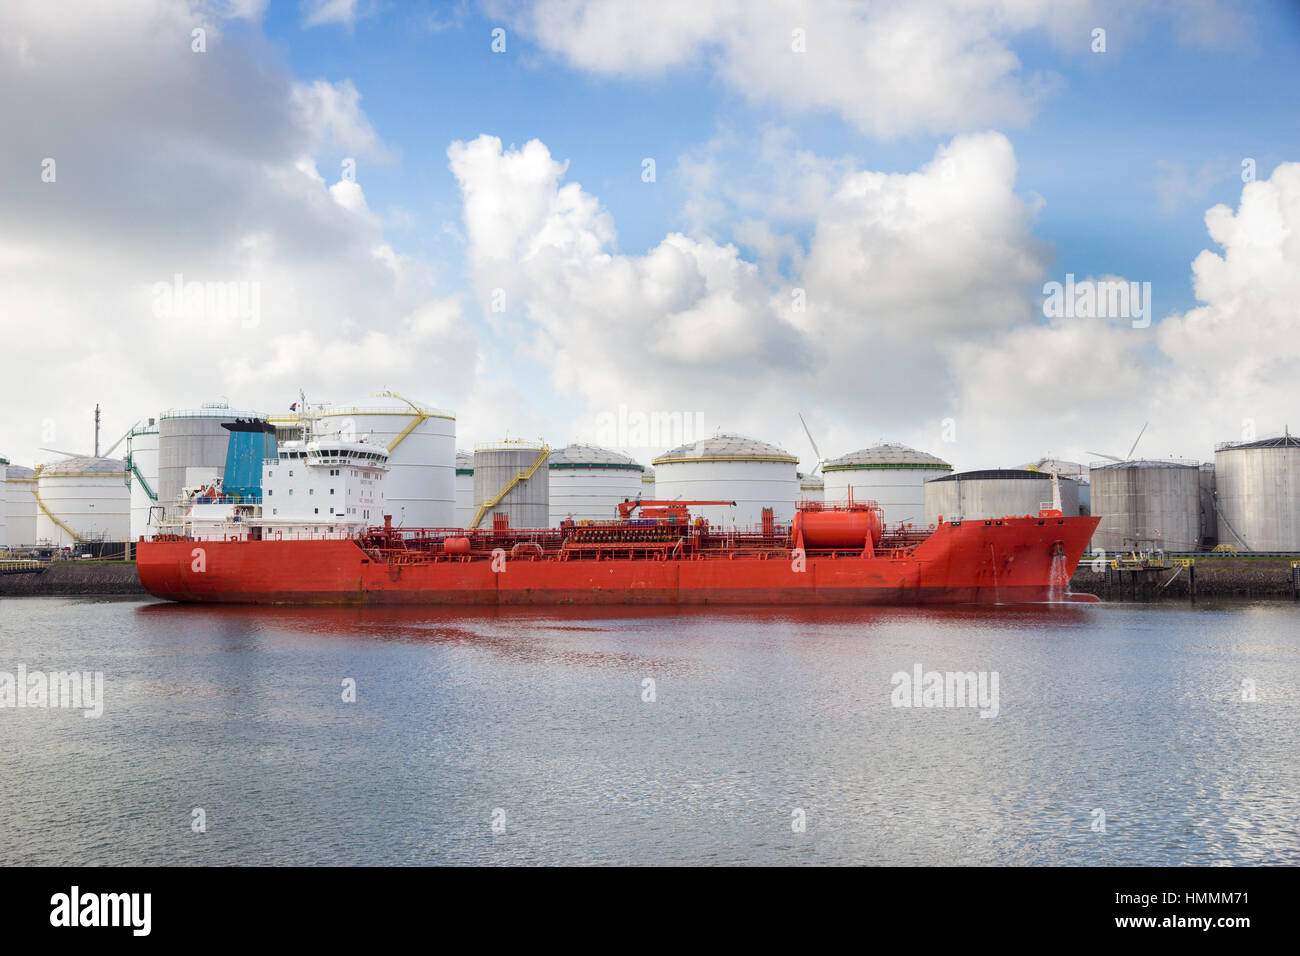 Red oil tanker moored at an oil terminal in a port Stock Photo